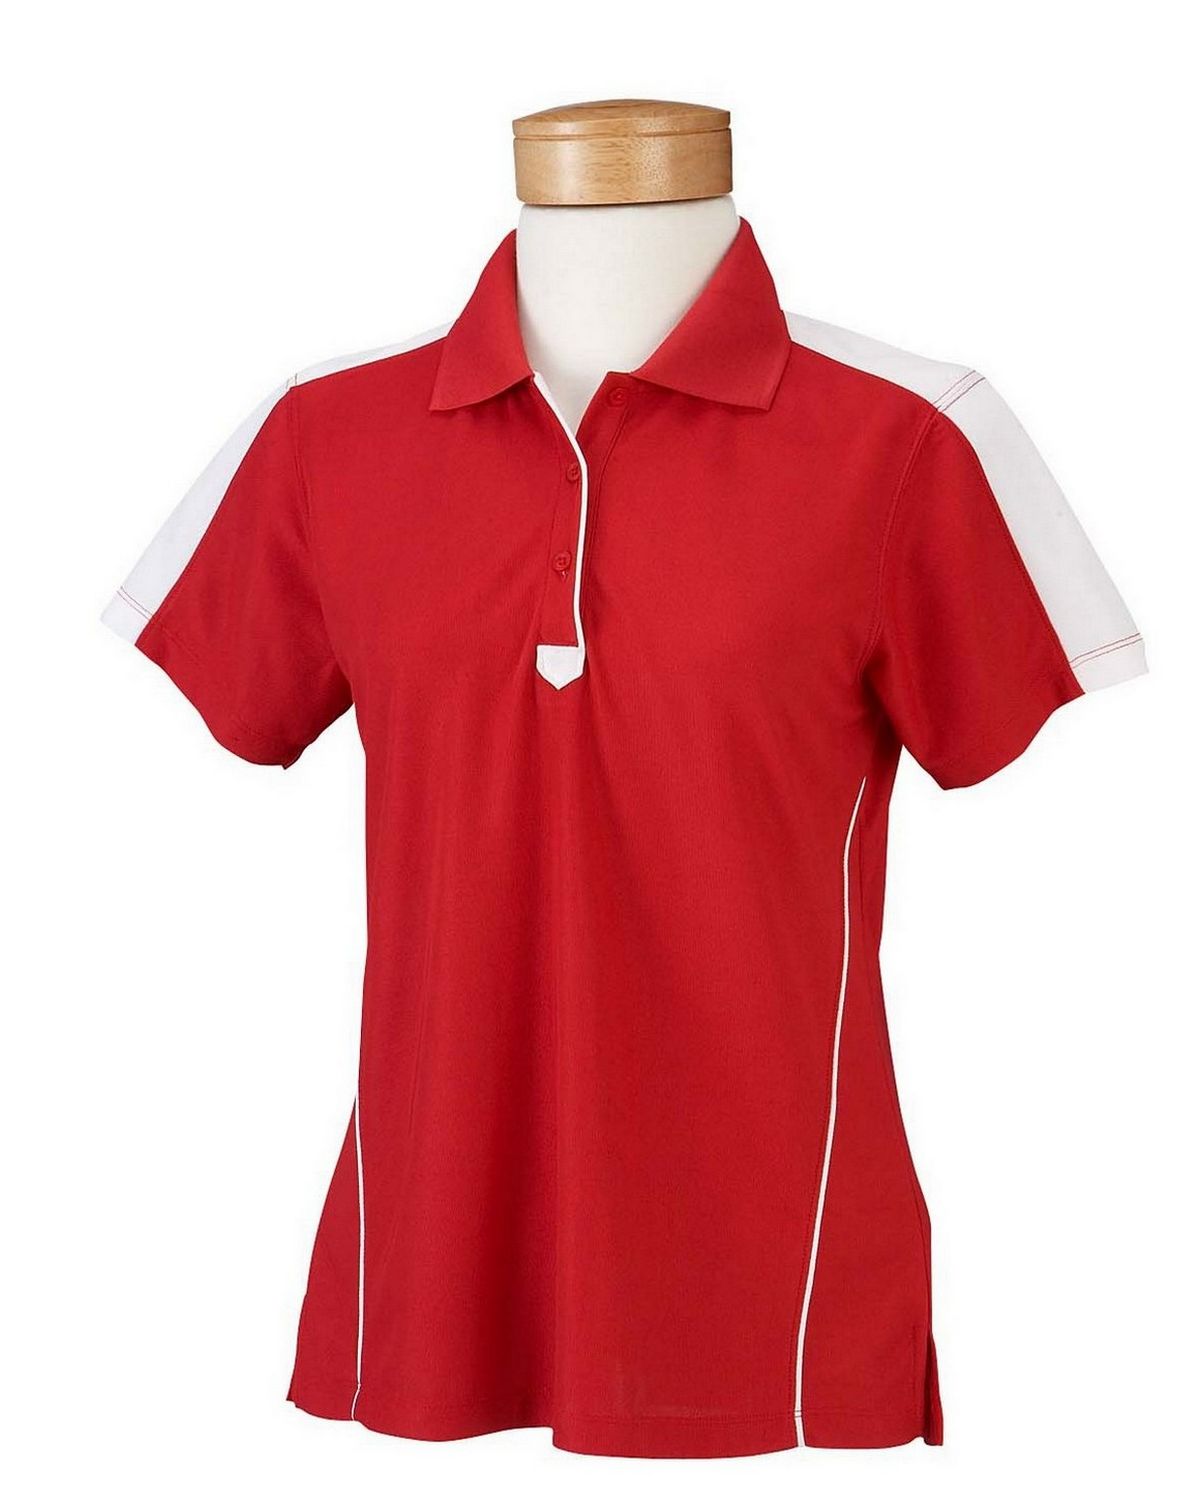 Buy Chestnut Hill CH355W Ladies’ Piped Technical Performance Polo